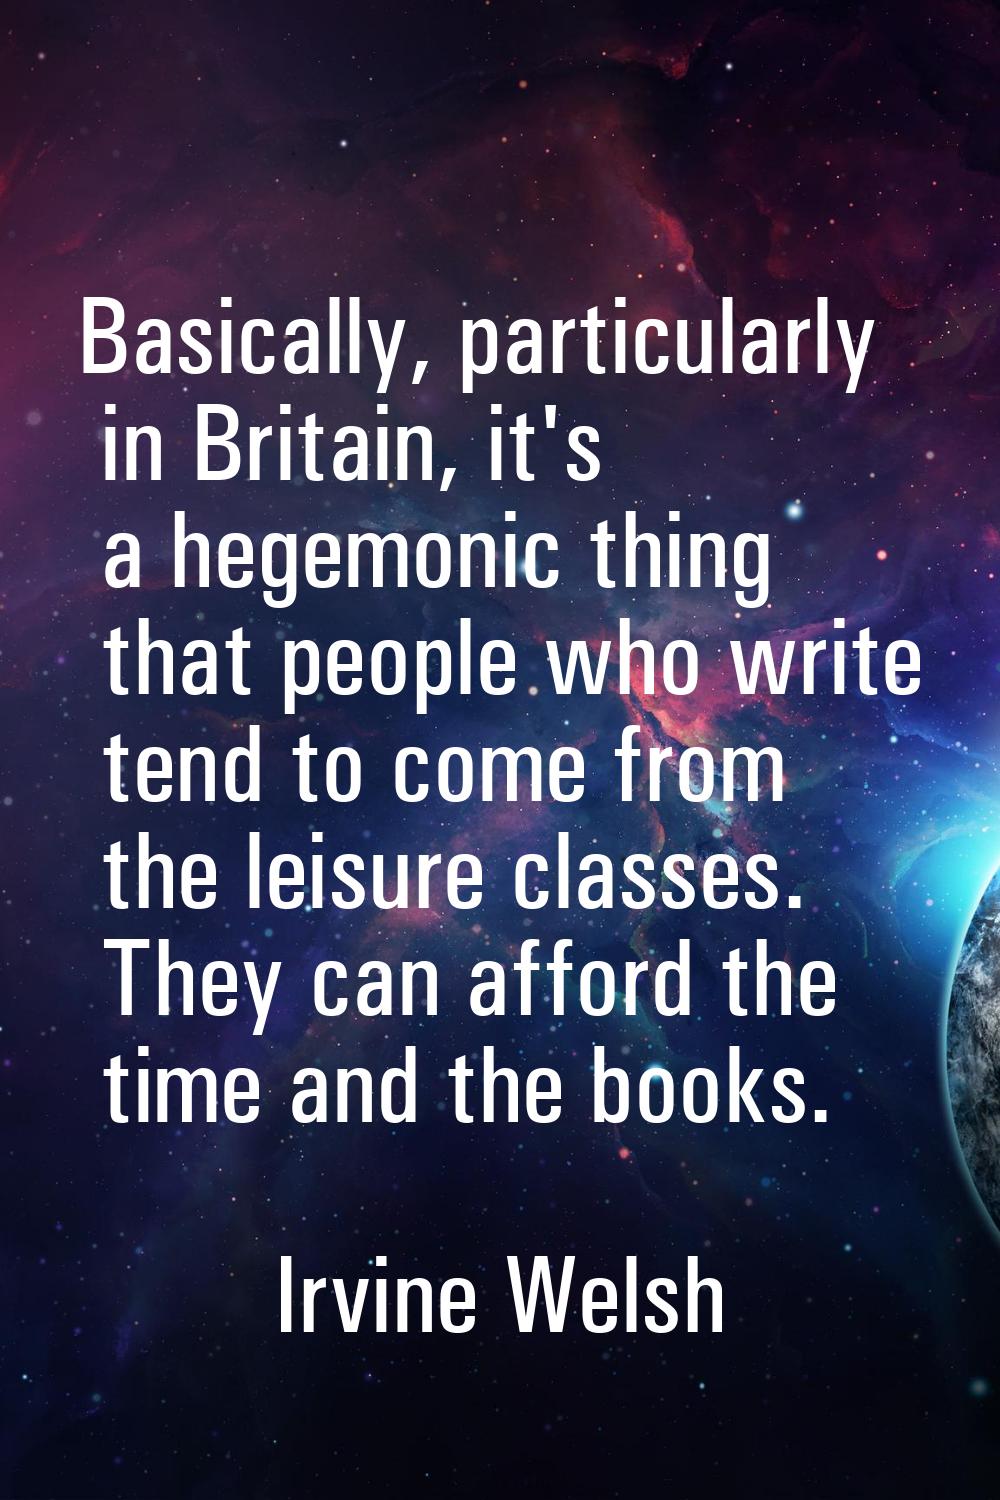 Basically, particularly in Britain, it's a hegemonic thing that people who write tend to come from 